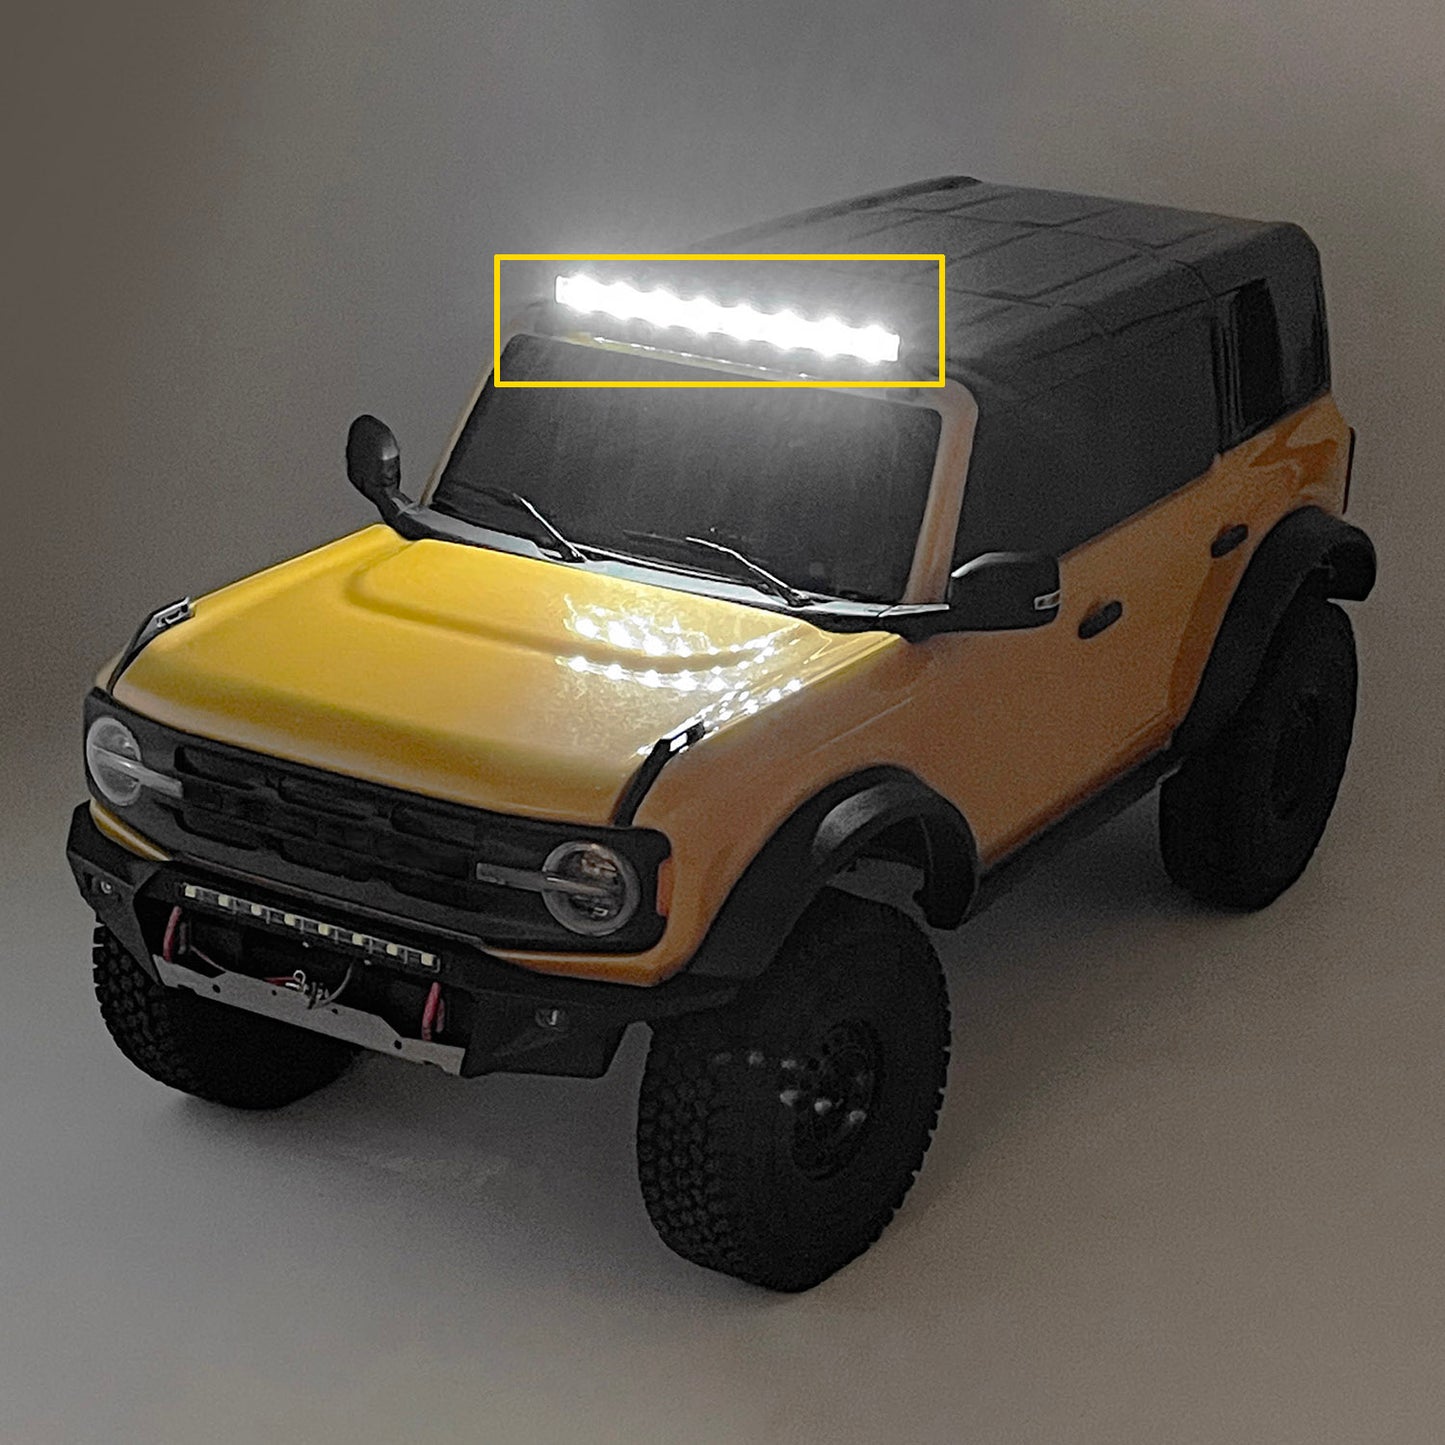 US Stock CCH LED Square Roof Lamp DIY Acessory Plastic for RC Crawler 1:10 Scale Vehicle DIY RC Racing Cars Model Parts